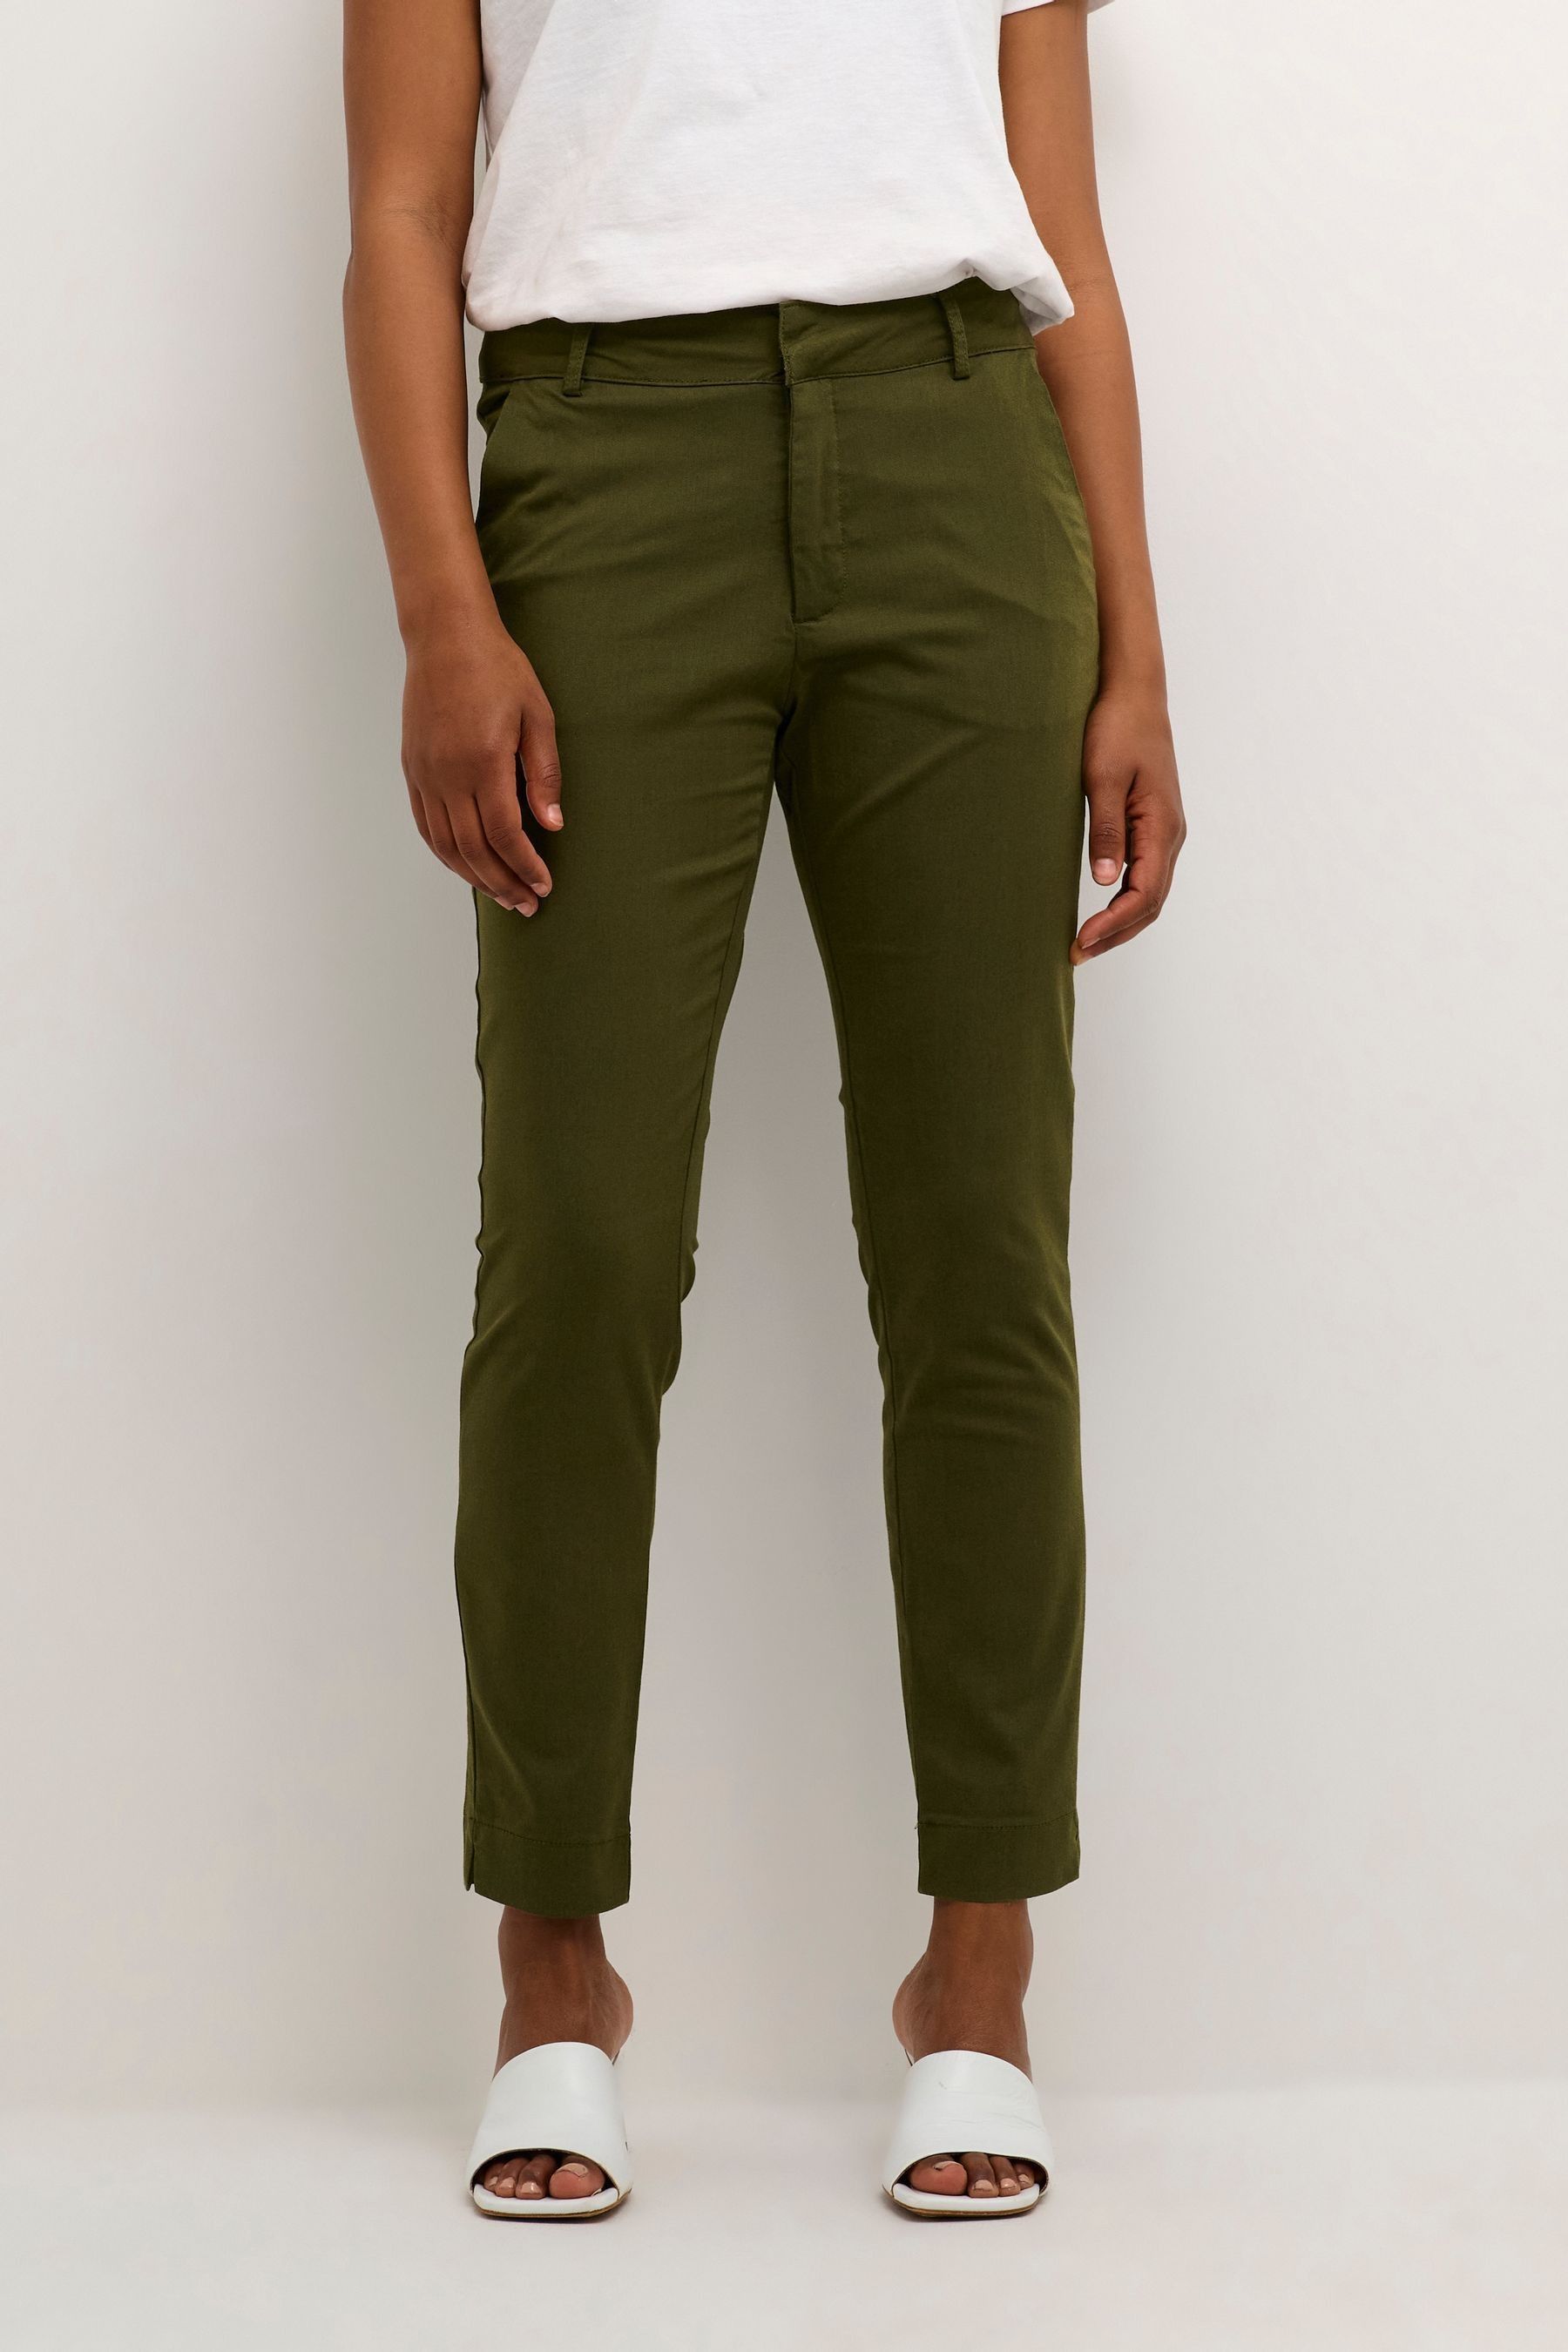 Buy Kaffe Lea Chino 7/8 Trousers from the Next UK online shop